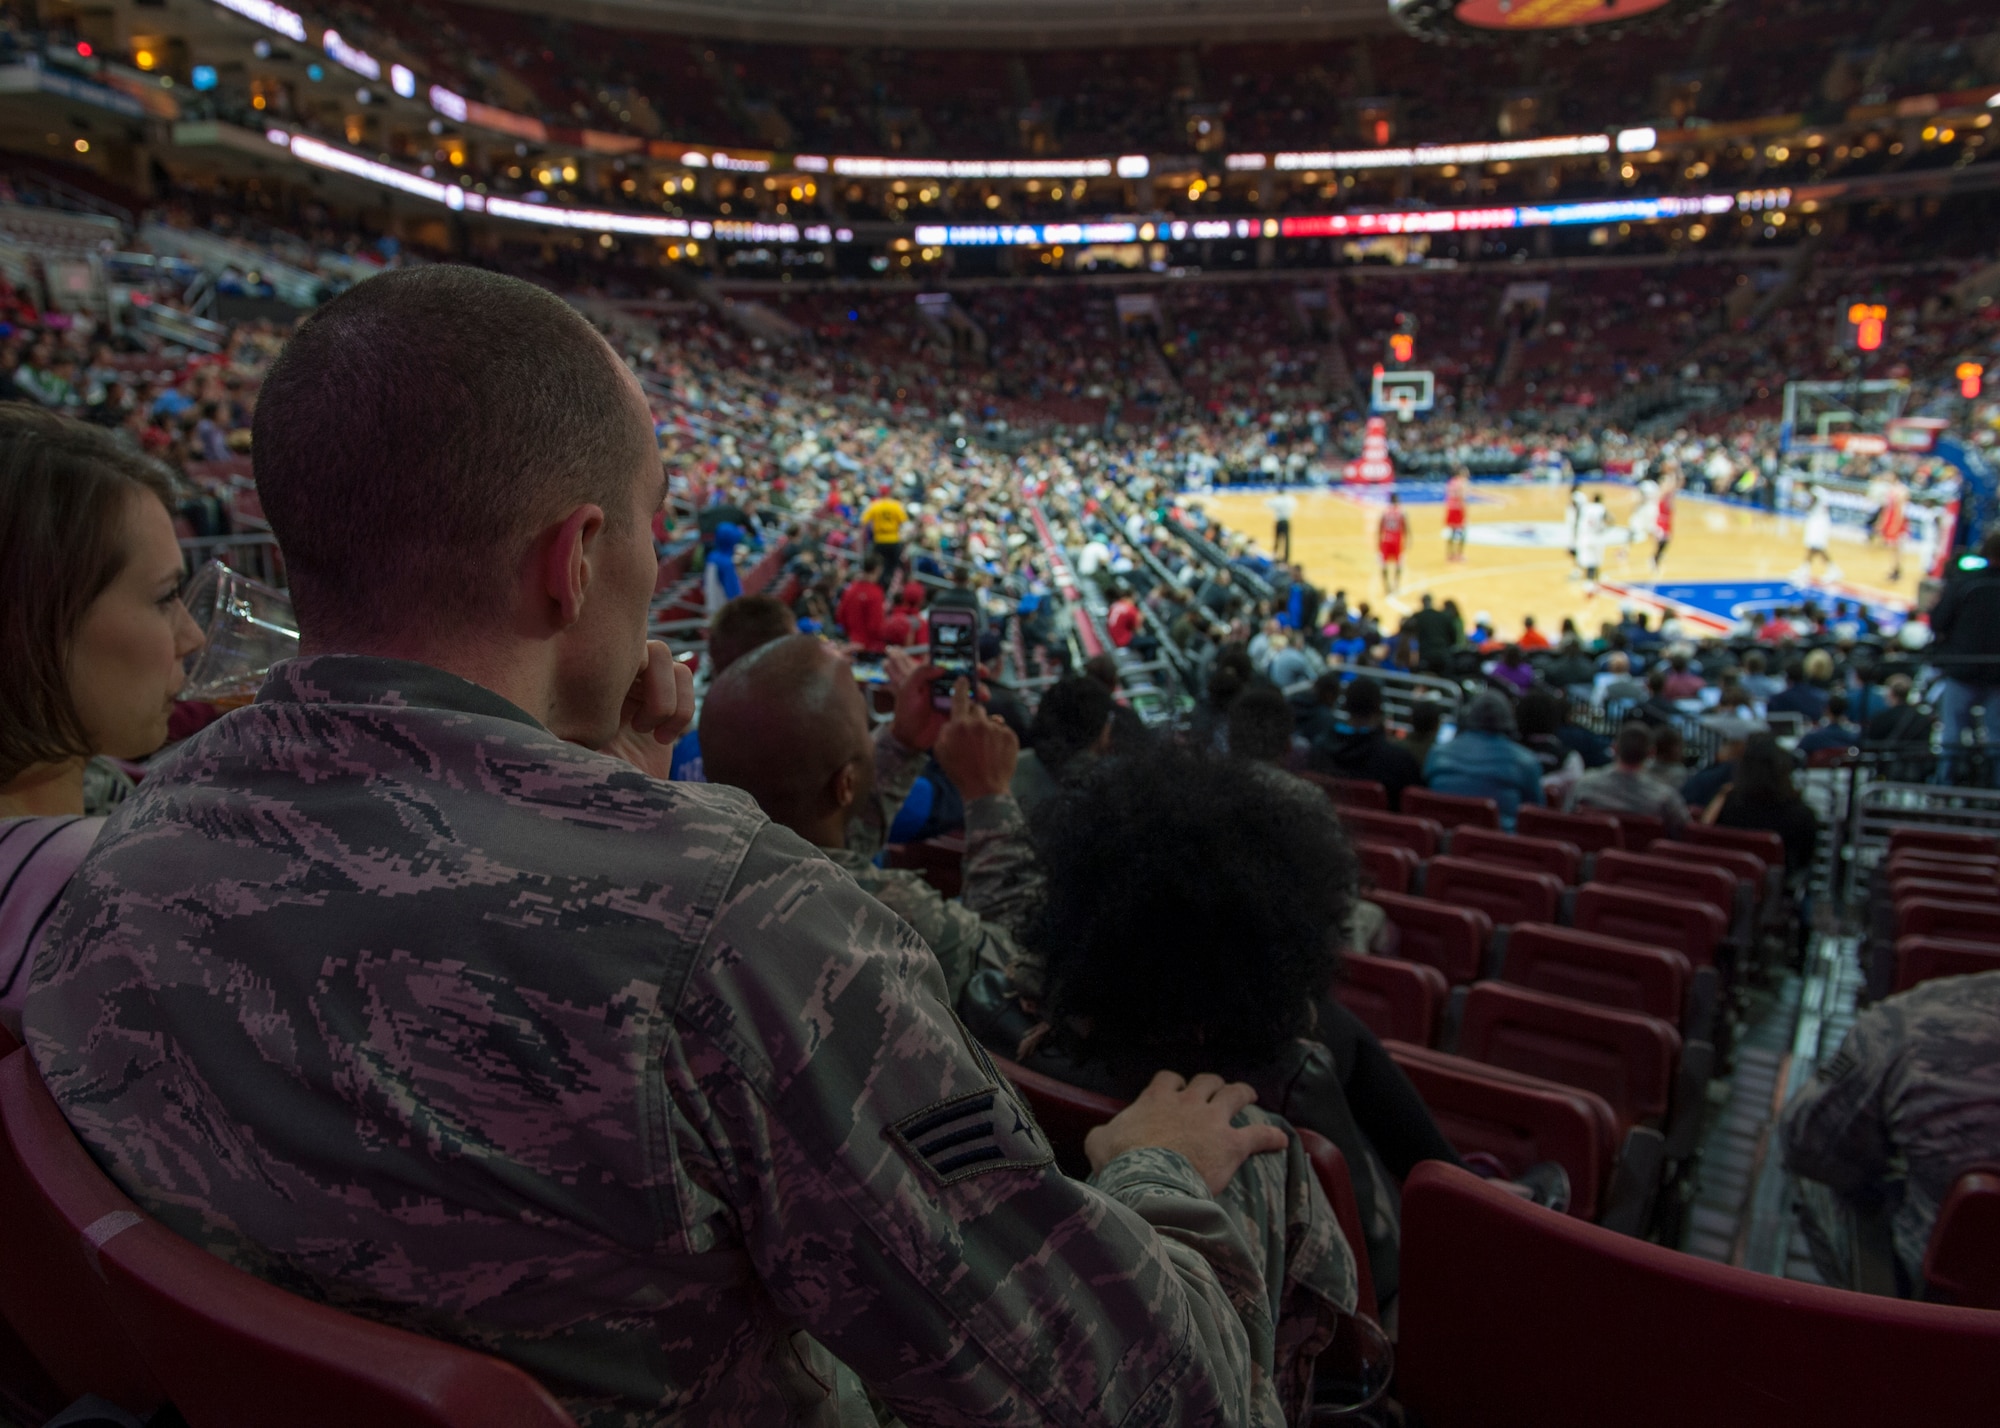 Senior Airman Brady O’Neill, 436th Comptroller Squadron financial analyst, watches a Chicago Bulls Philadelphia 76ers basketball game Nov. 7, 2014, at the Wells Fargo Center, in Philadelphia. Tickets were provided to service members in support of the NBA’s “Commitment to Service” program, a collaboration between the NBA, USA Basketball and the Department of Defense. (U.S. Air Force photo/Airman 1st Class Zachary Cacicia))